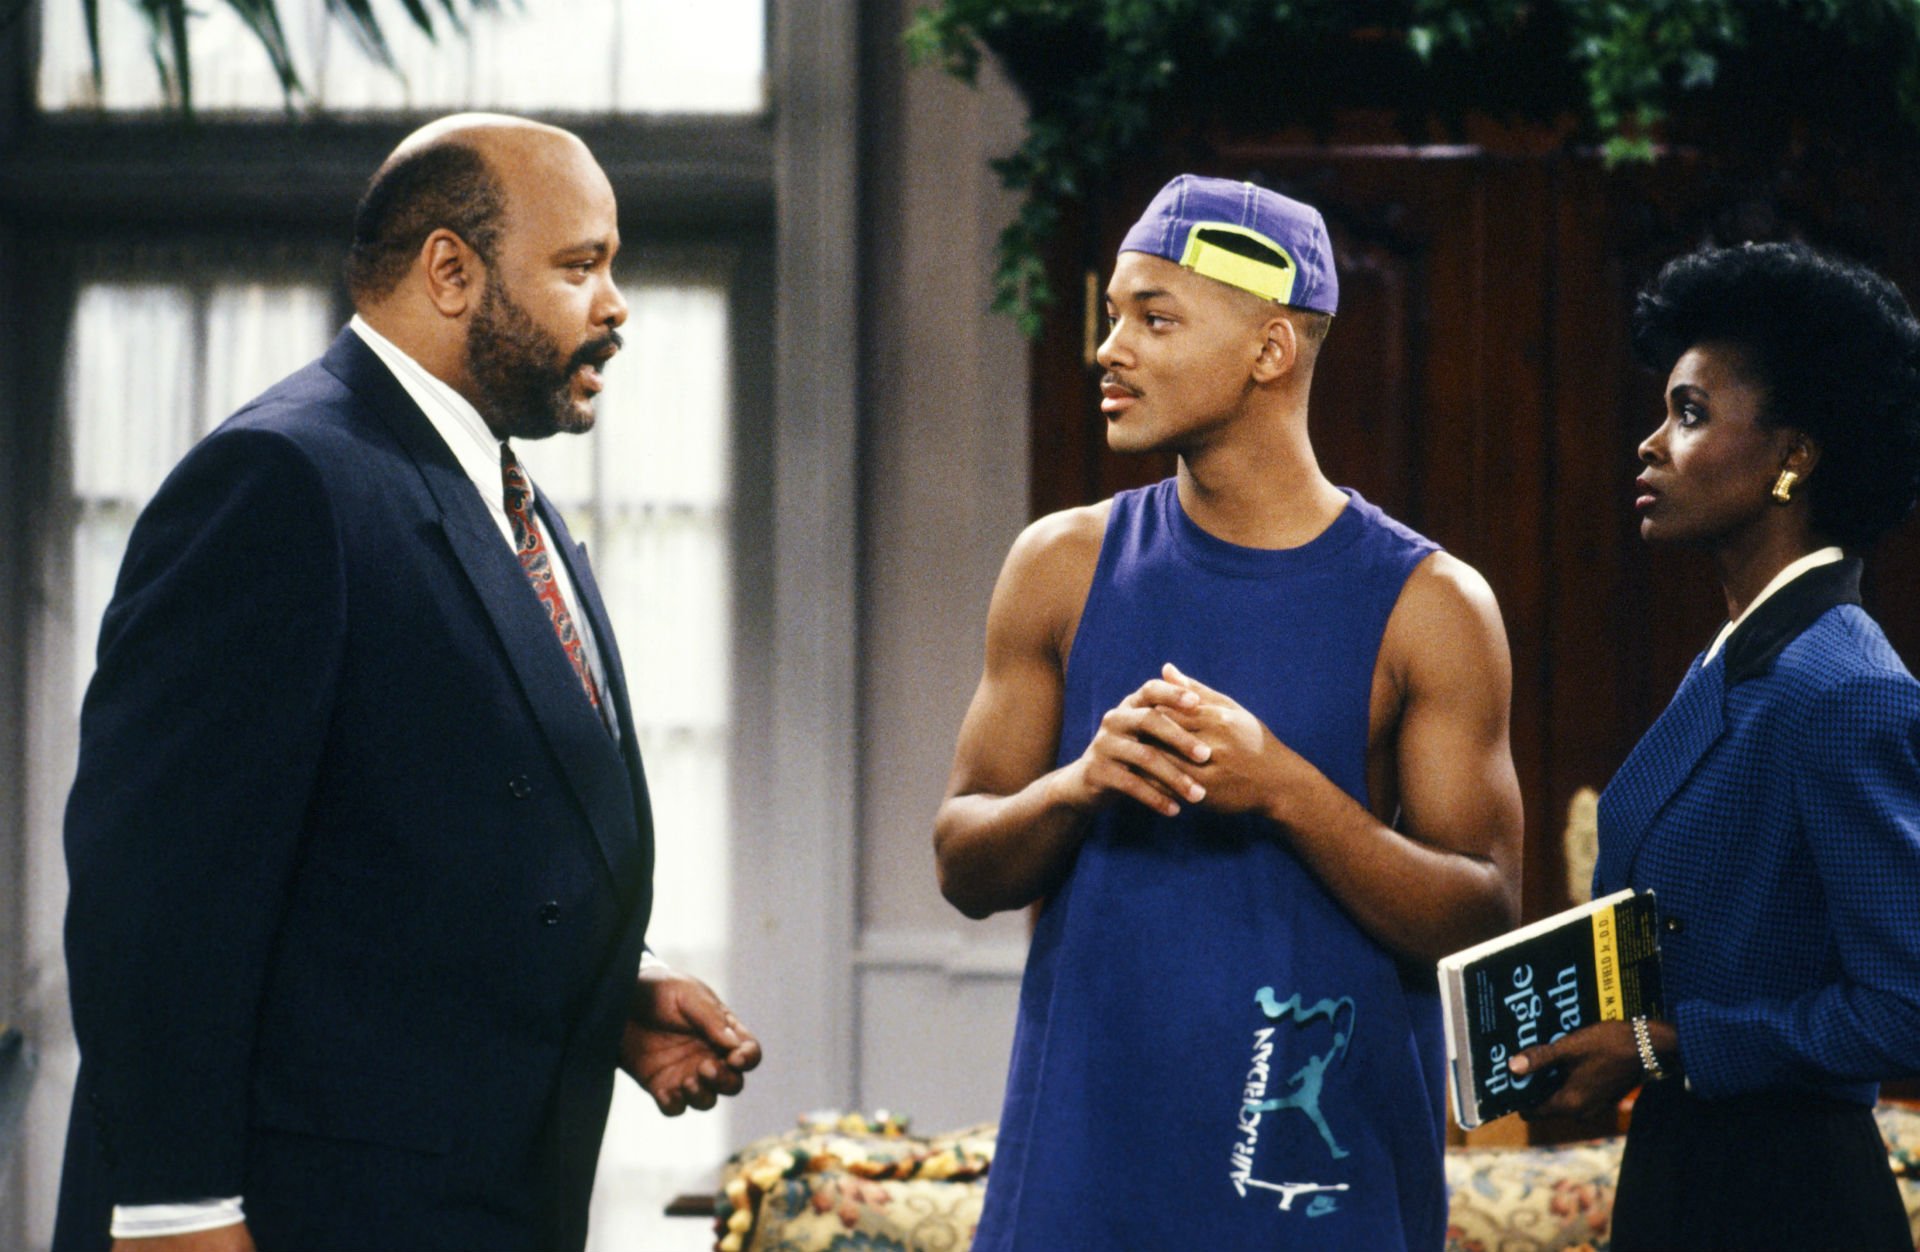 fresh prince of bel air, Comedy, Sitcom, Series, Television, Will, Smith, Fresh, Prince, Bel, Air Wallpaper